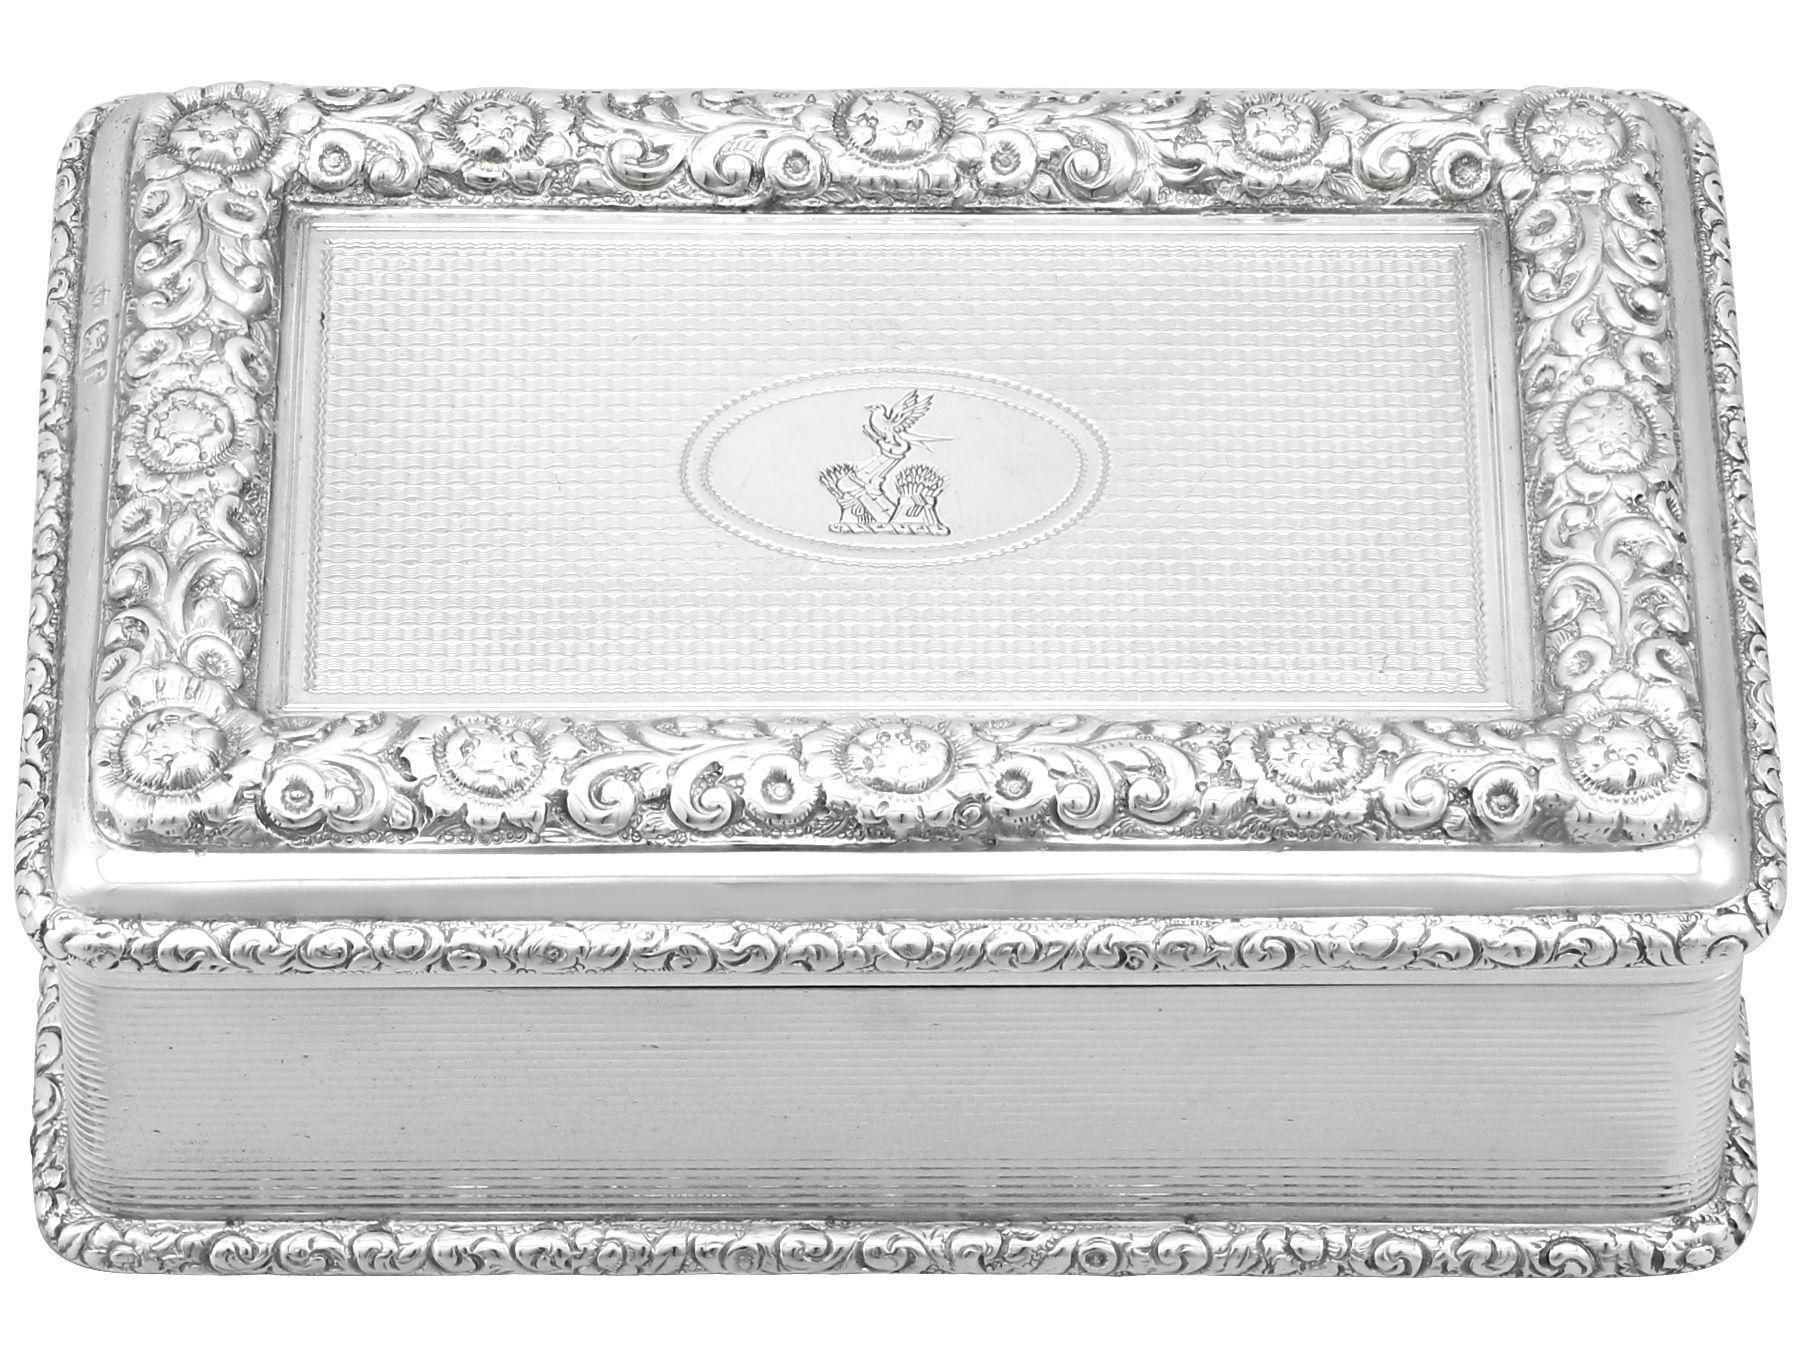 An exceptional, fine and impressive antique George V English sterling silver table snuff box; an addition to our collectable silverware collection

This exceptional and large antique George V sterling silver snuff box has a rectangular, rounded